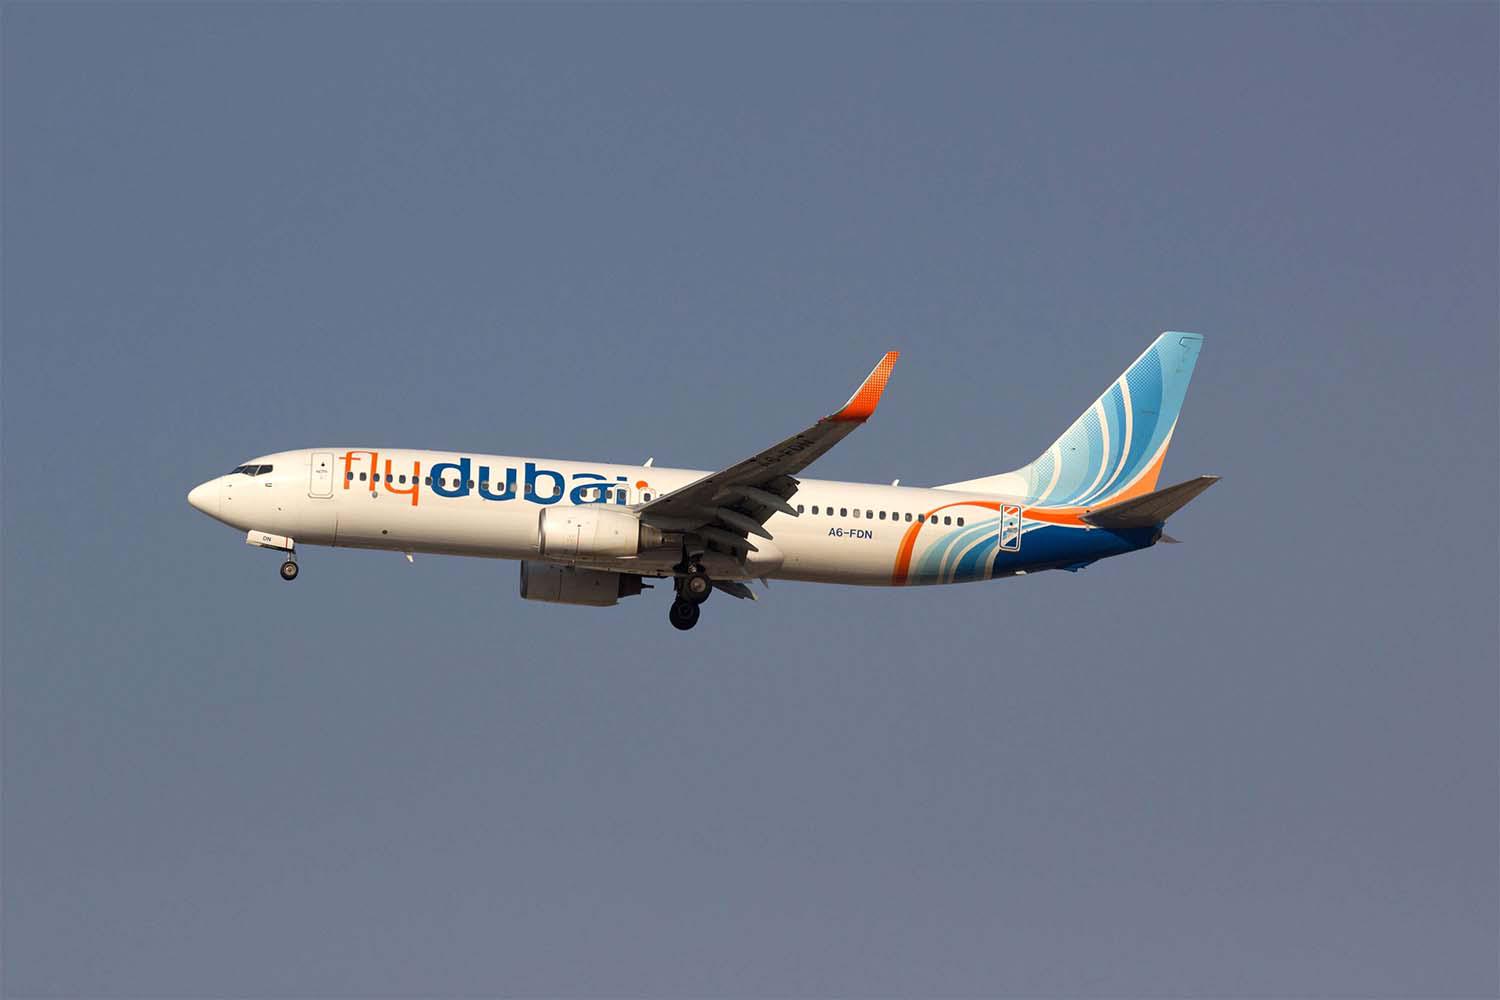 flydubai will operate 14 weekly services between the UAE's and Israel's financial capitals from November 26